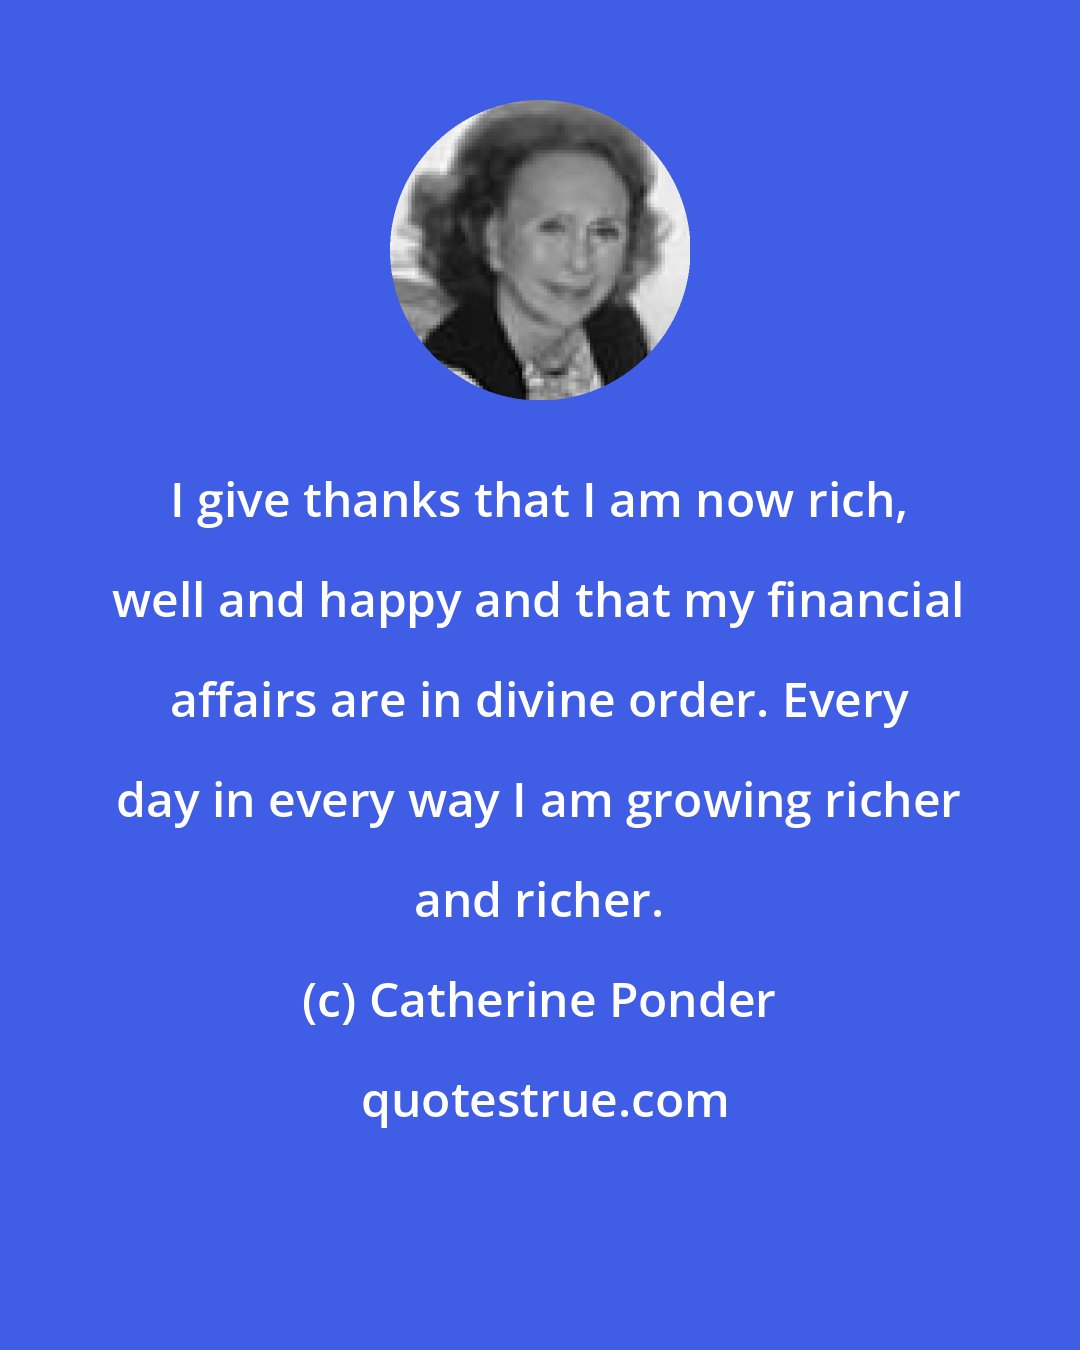 Catherine Ponder: I give thanks that I am now rich, well and happy and that my financial affairs are in divine order. Every day in every way I am growing richer and richer.